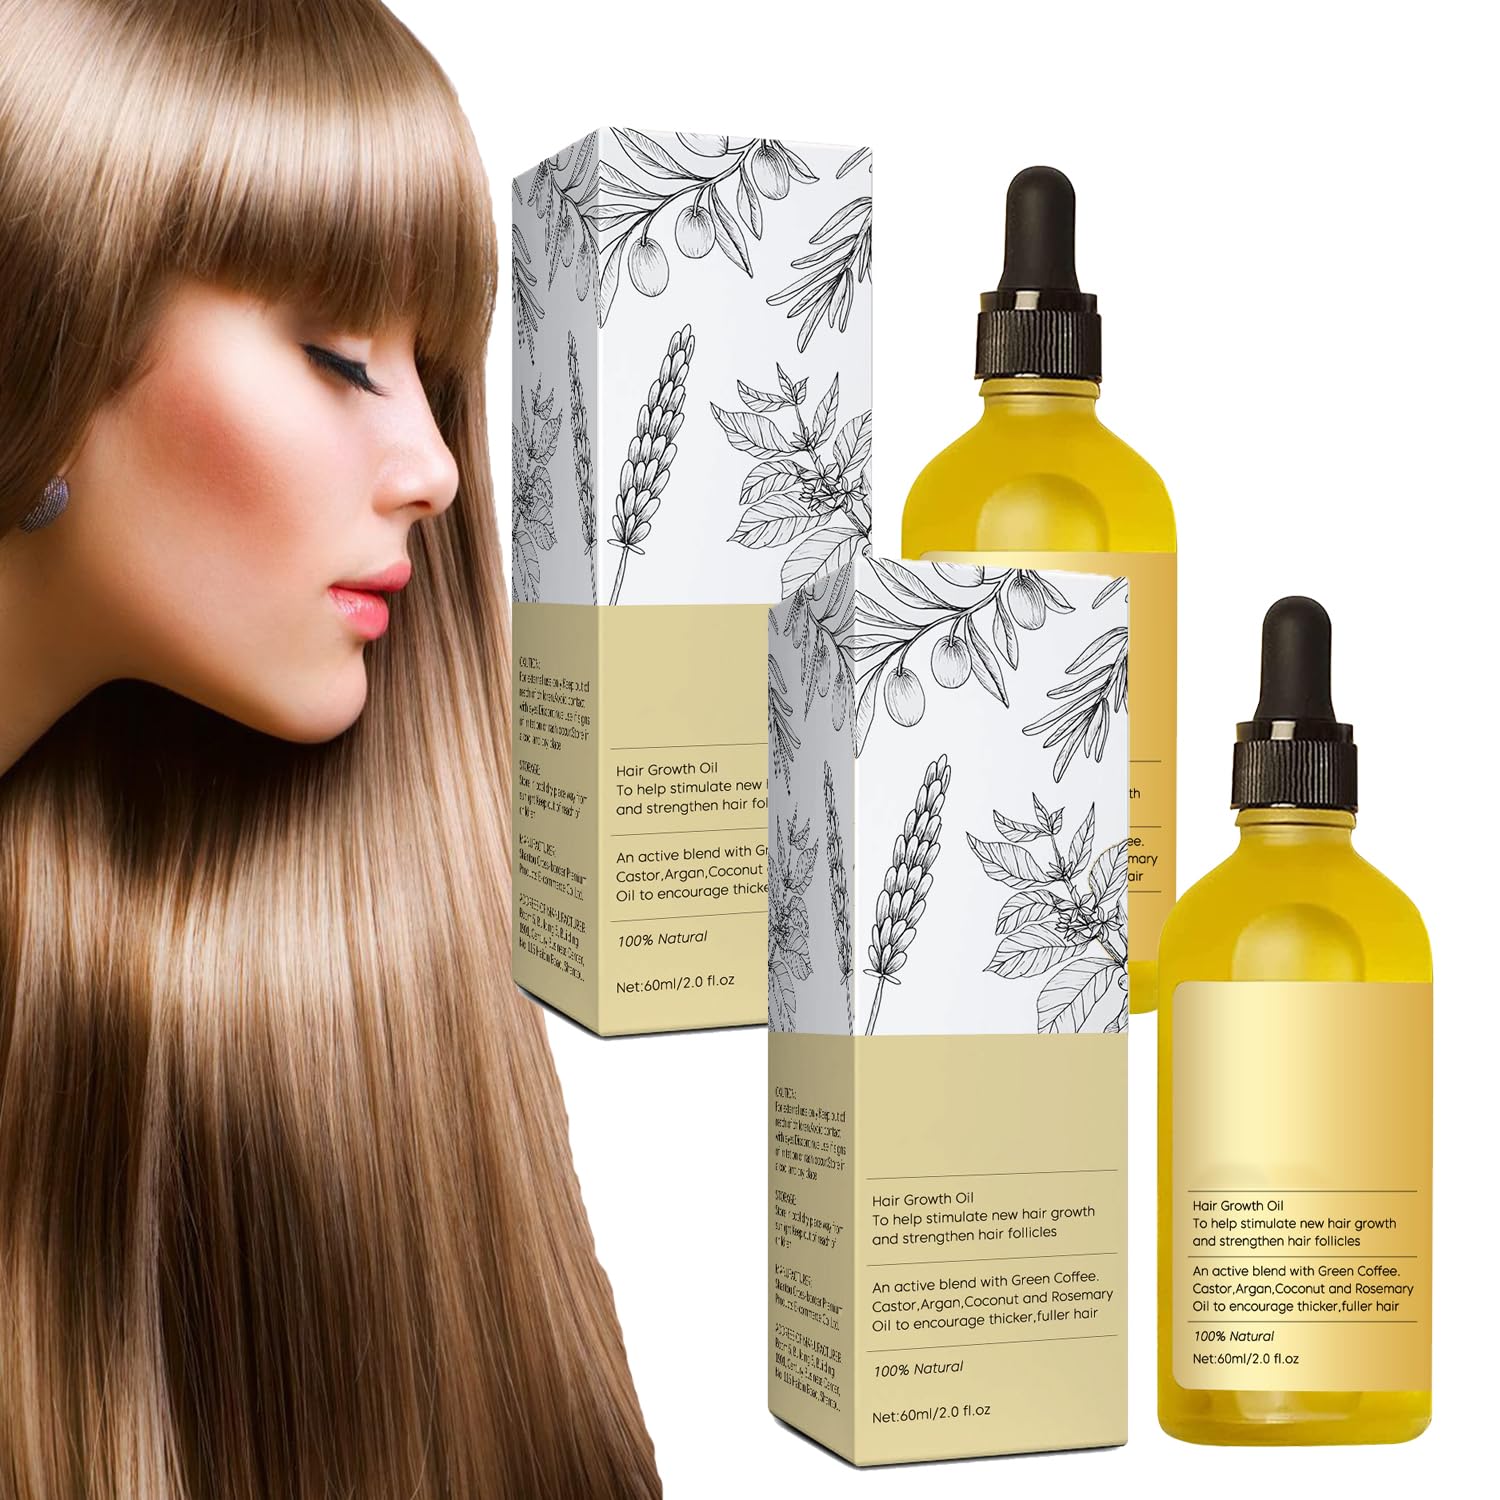 This hair oil can be the solution to your hair problem